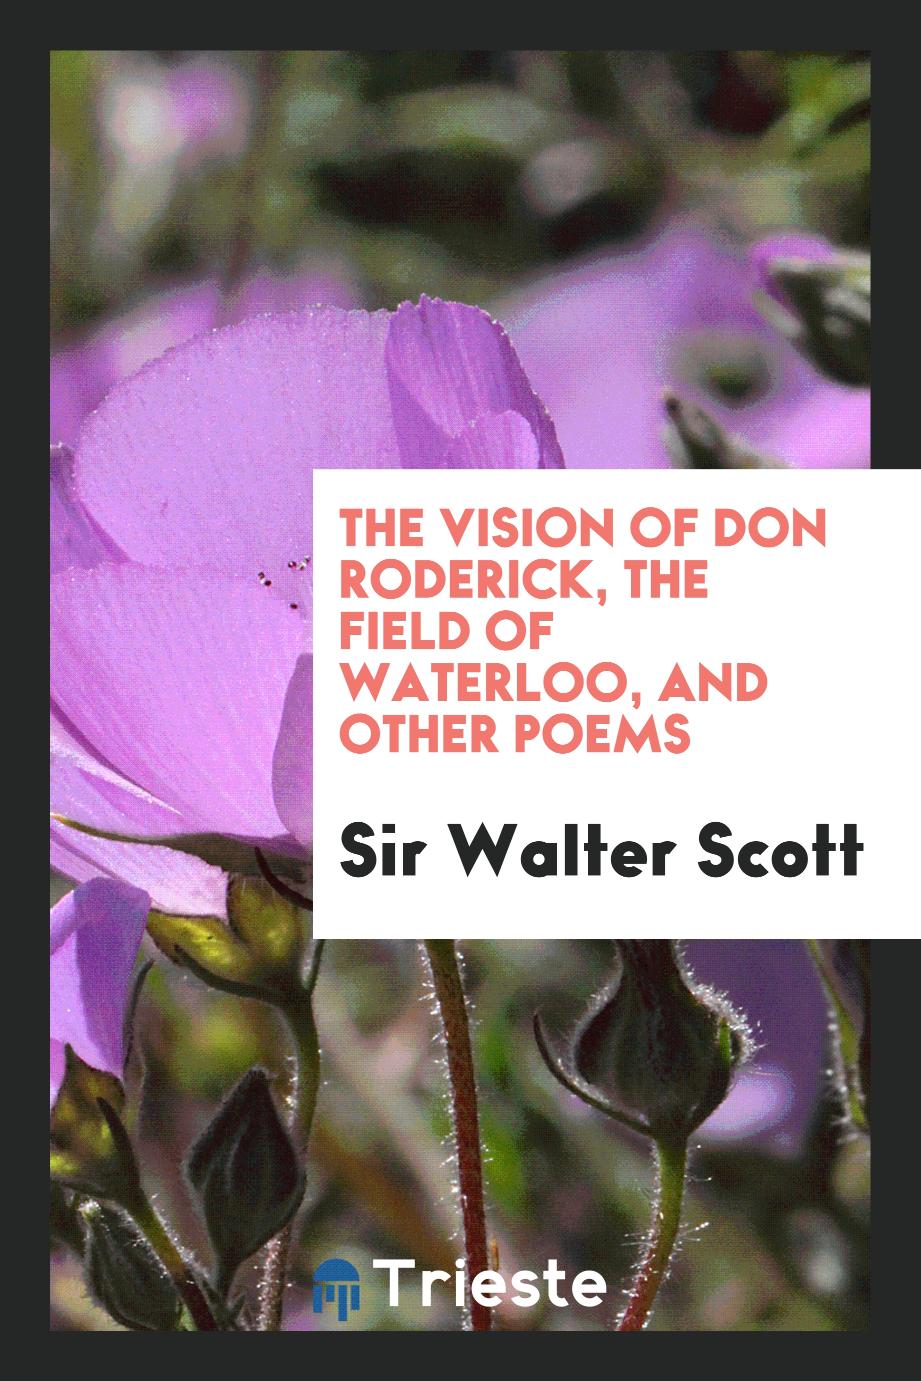 The Vision of Don Roderick, the Field of Waterloo, and Other Poems